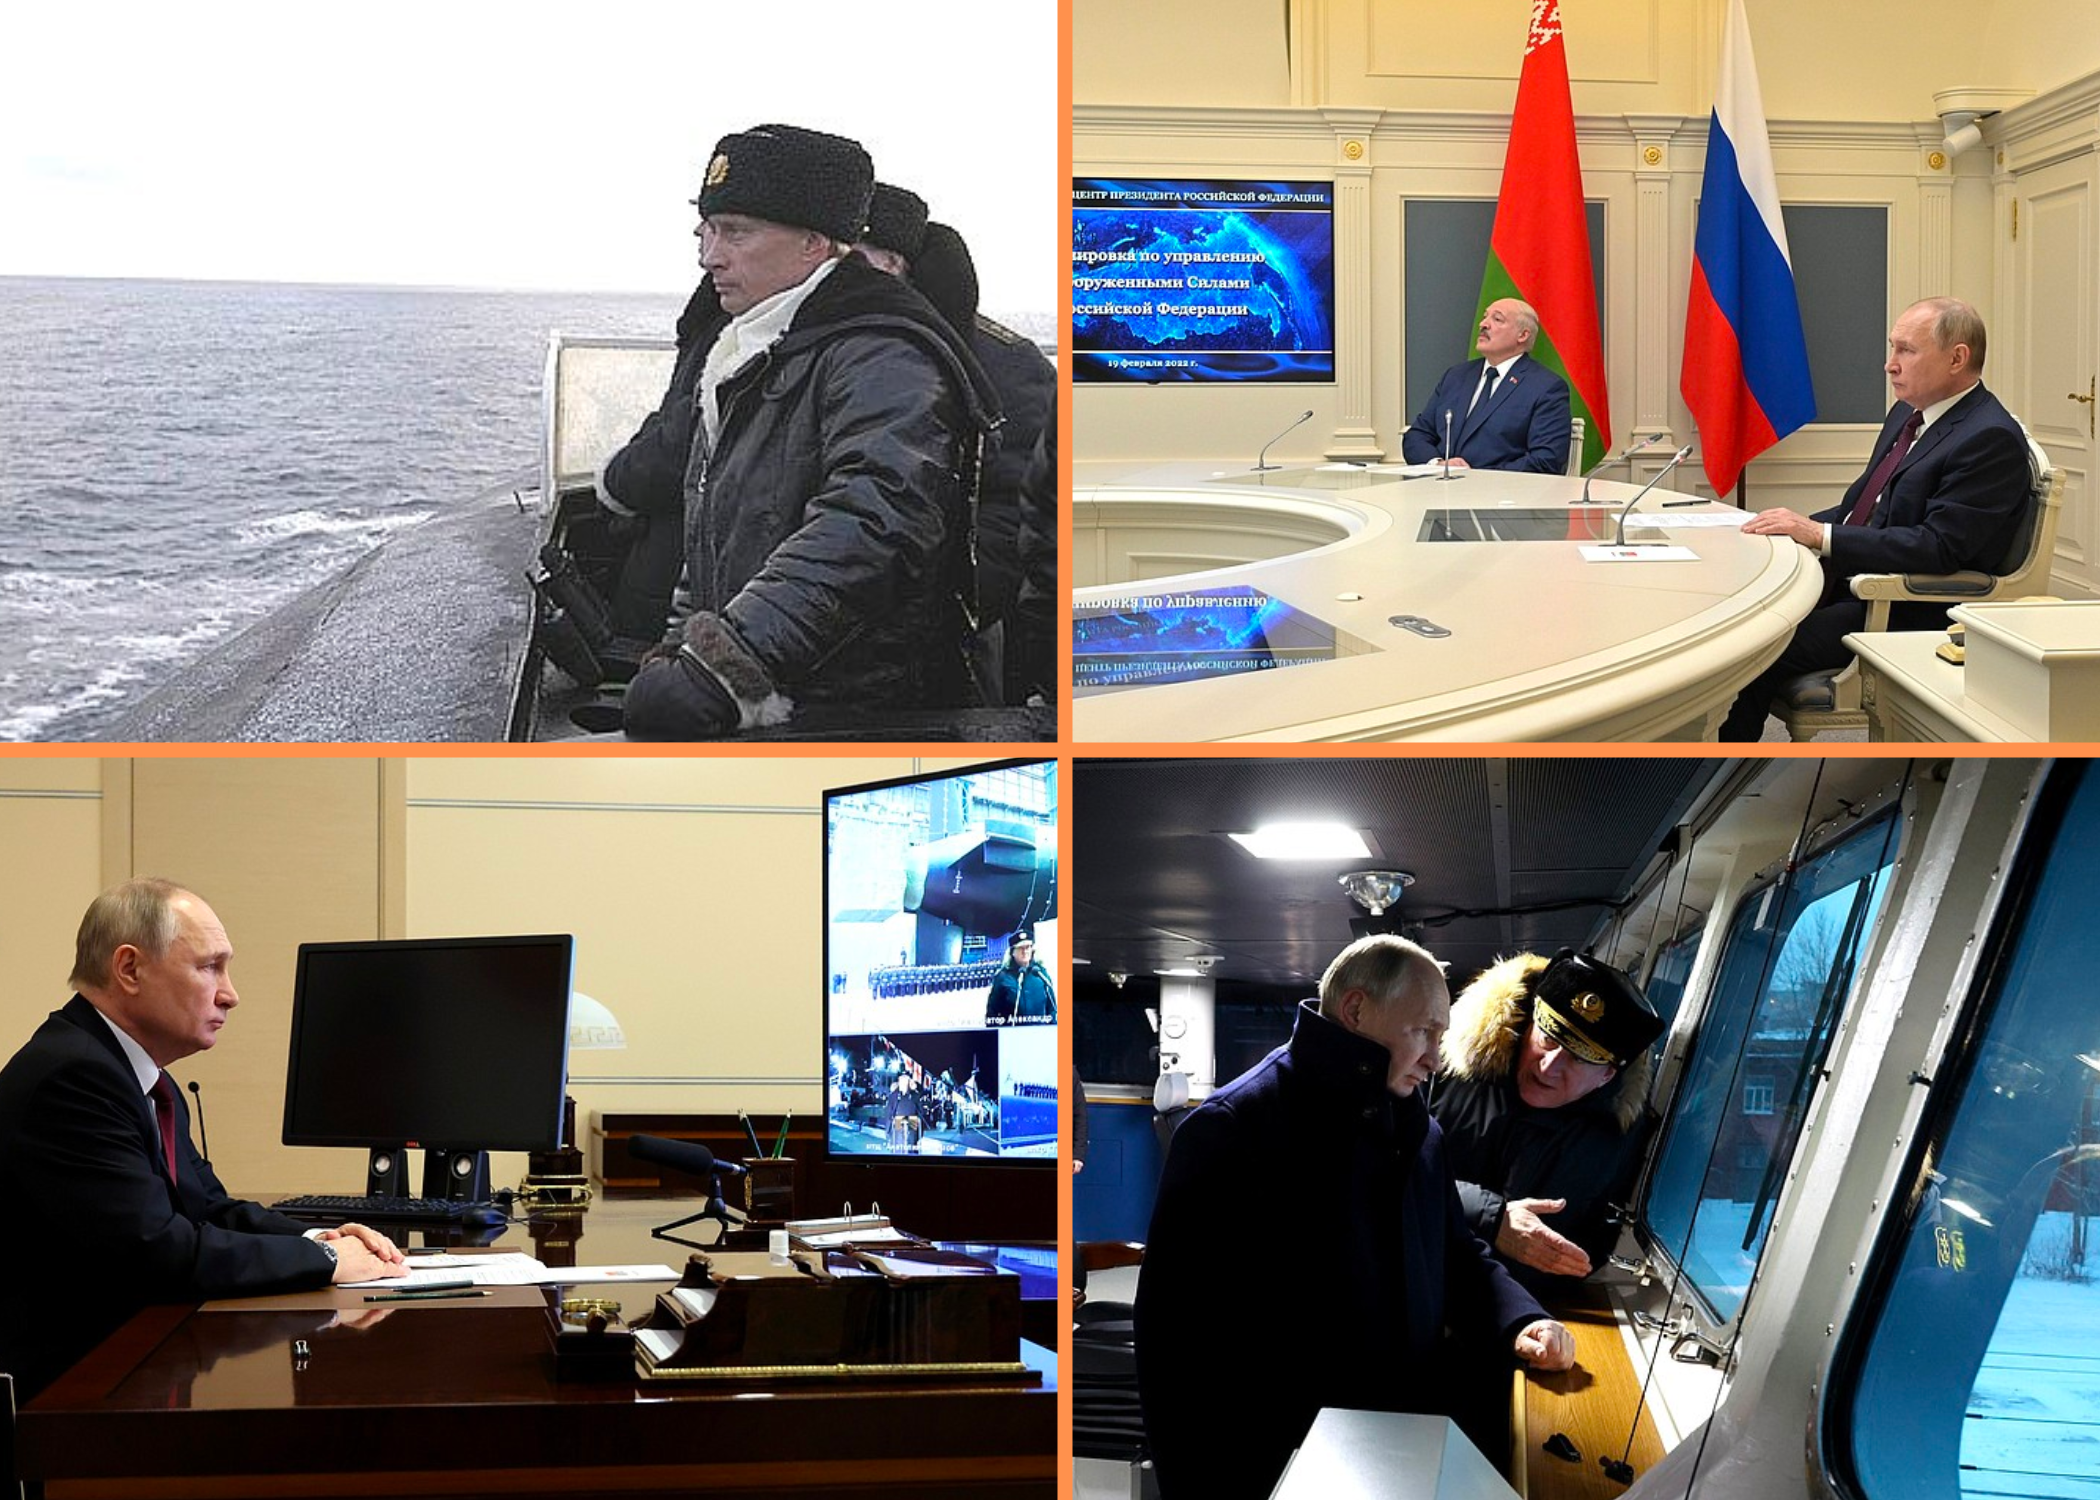 TOP LEFT: Putin views a strategic command post exercise in the Barents Sea in 2004. TOP RIGHT: Putin and President Belarus Lukashenko observe a February 2022 strategic deterrence forces exercise. BOTTOM LEFT: Putin attends a ceremony in December 2022 to raise the flag on the Generalissimus Suvorov SSBN and launch the Emperor Aleksandr III SSBN. BOTTOM RIGHT: Putin observes the frigate Admiral Kasatonov during the December 2023 commissioning ceremony of the Emperor Aleksandr III ballistic missile submarine and the Krasnoyarsk guided missile submarine.